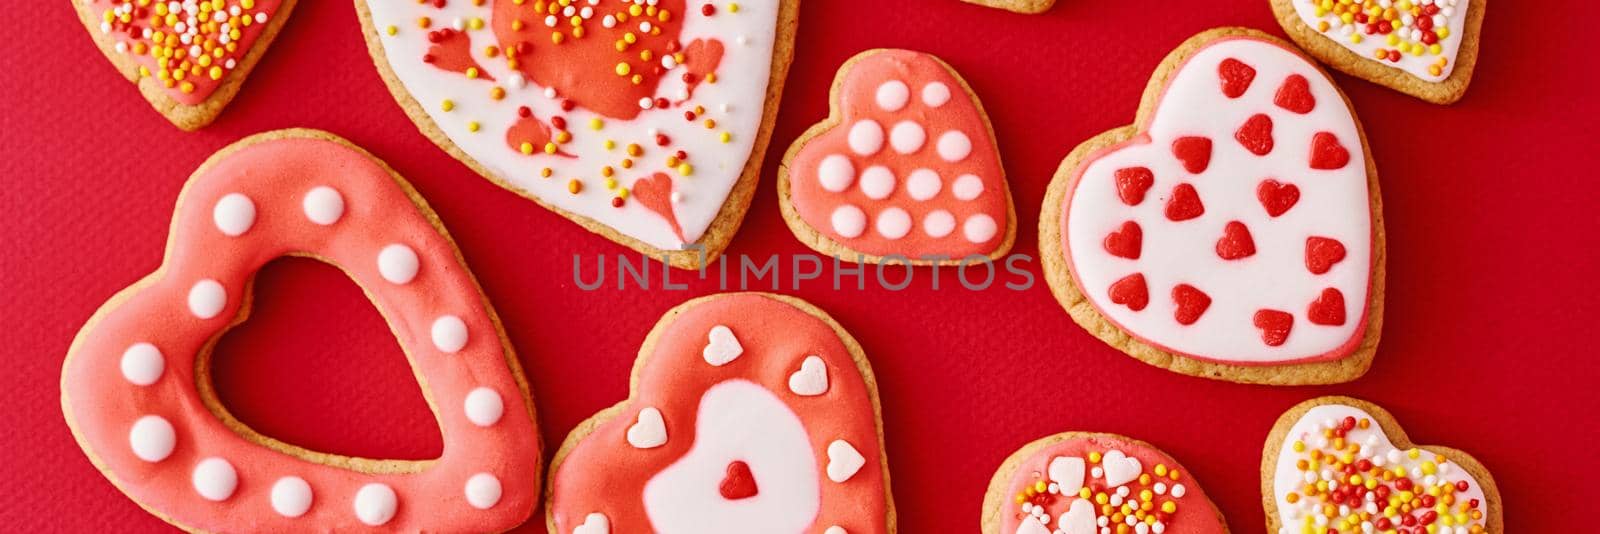 Background of decorated with icing and glazed heart shape cookies on red background, long banner. Valentines Day food concept